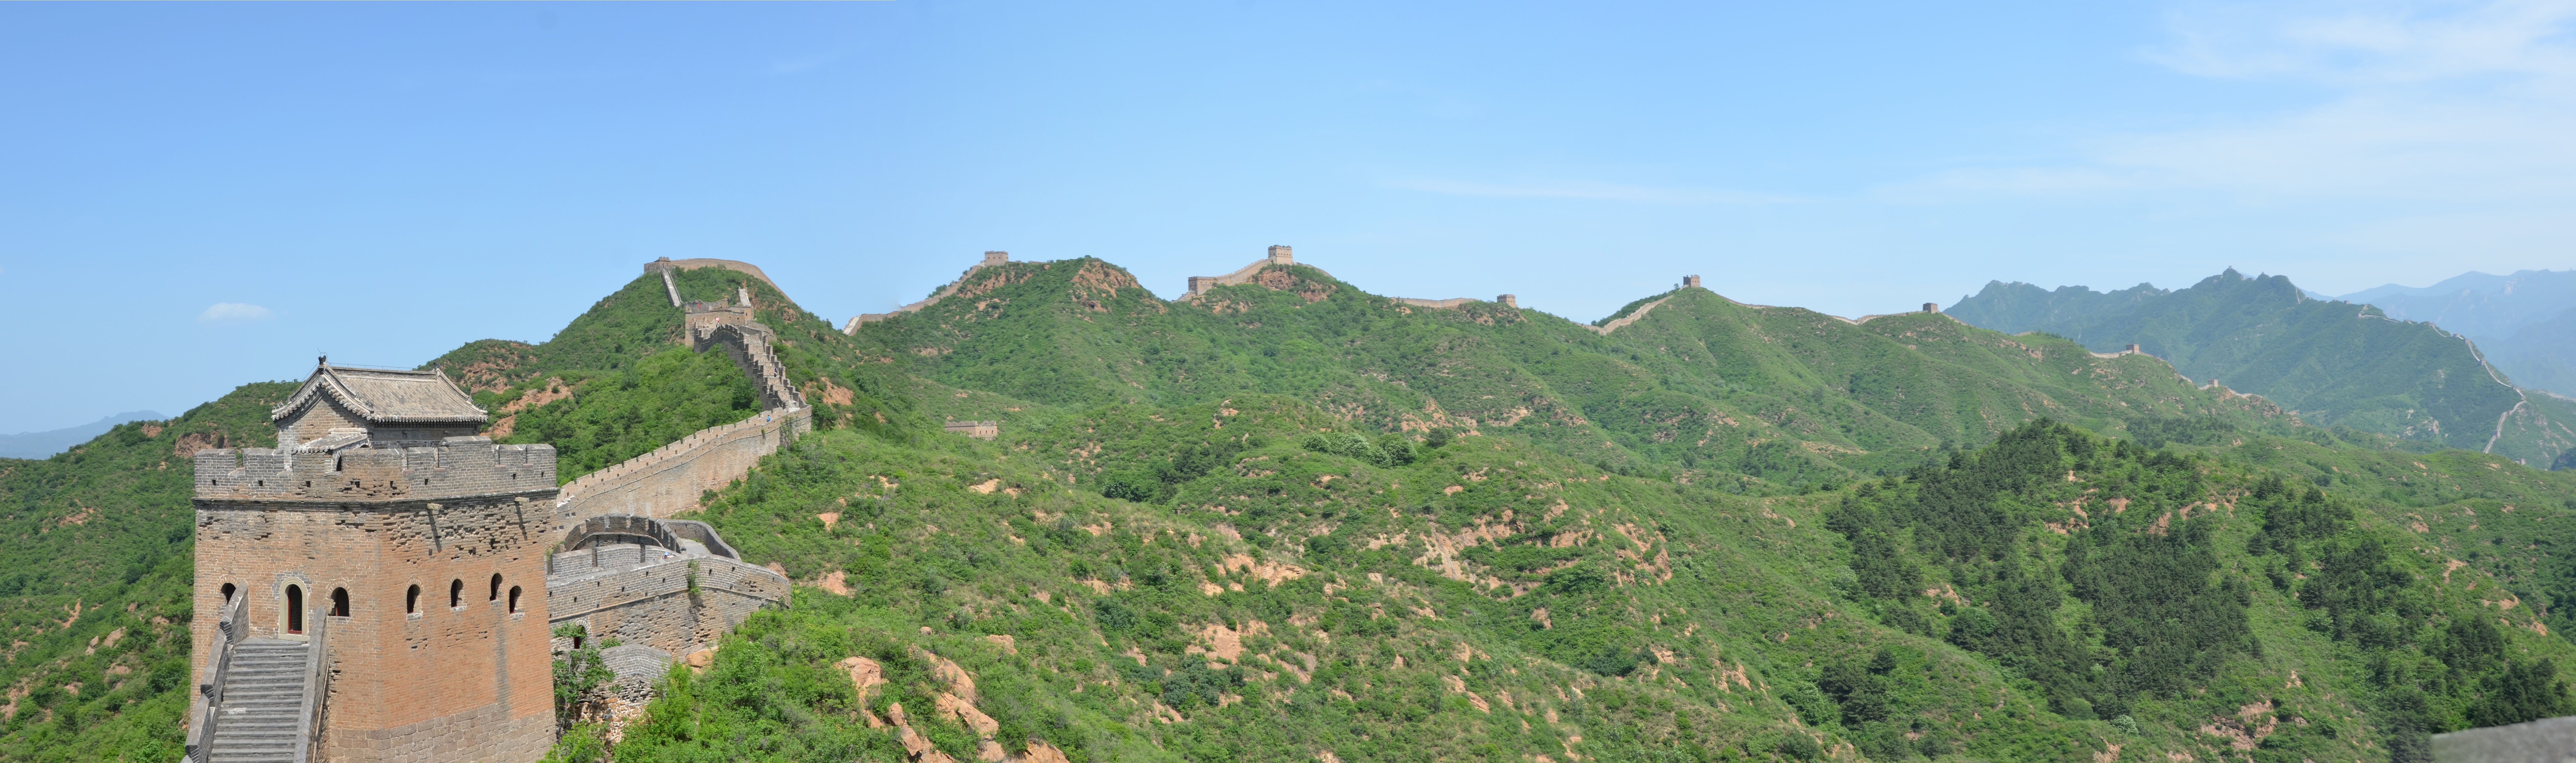 Great Wall Of China Ultrawide Wall Nature Sky Clouds Trees Landscape Mountains 10000x2961